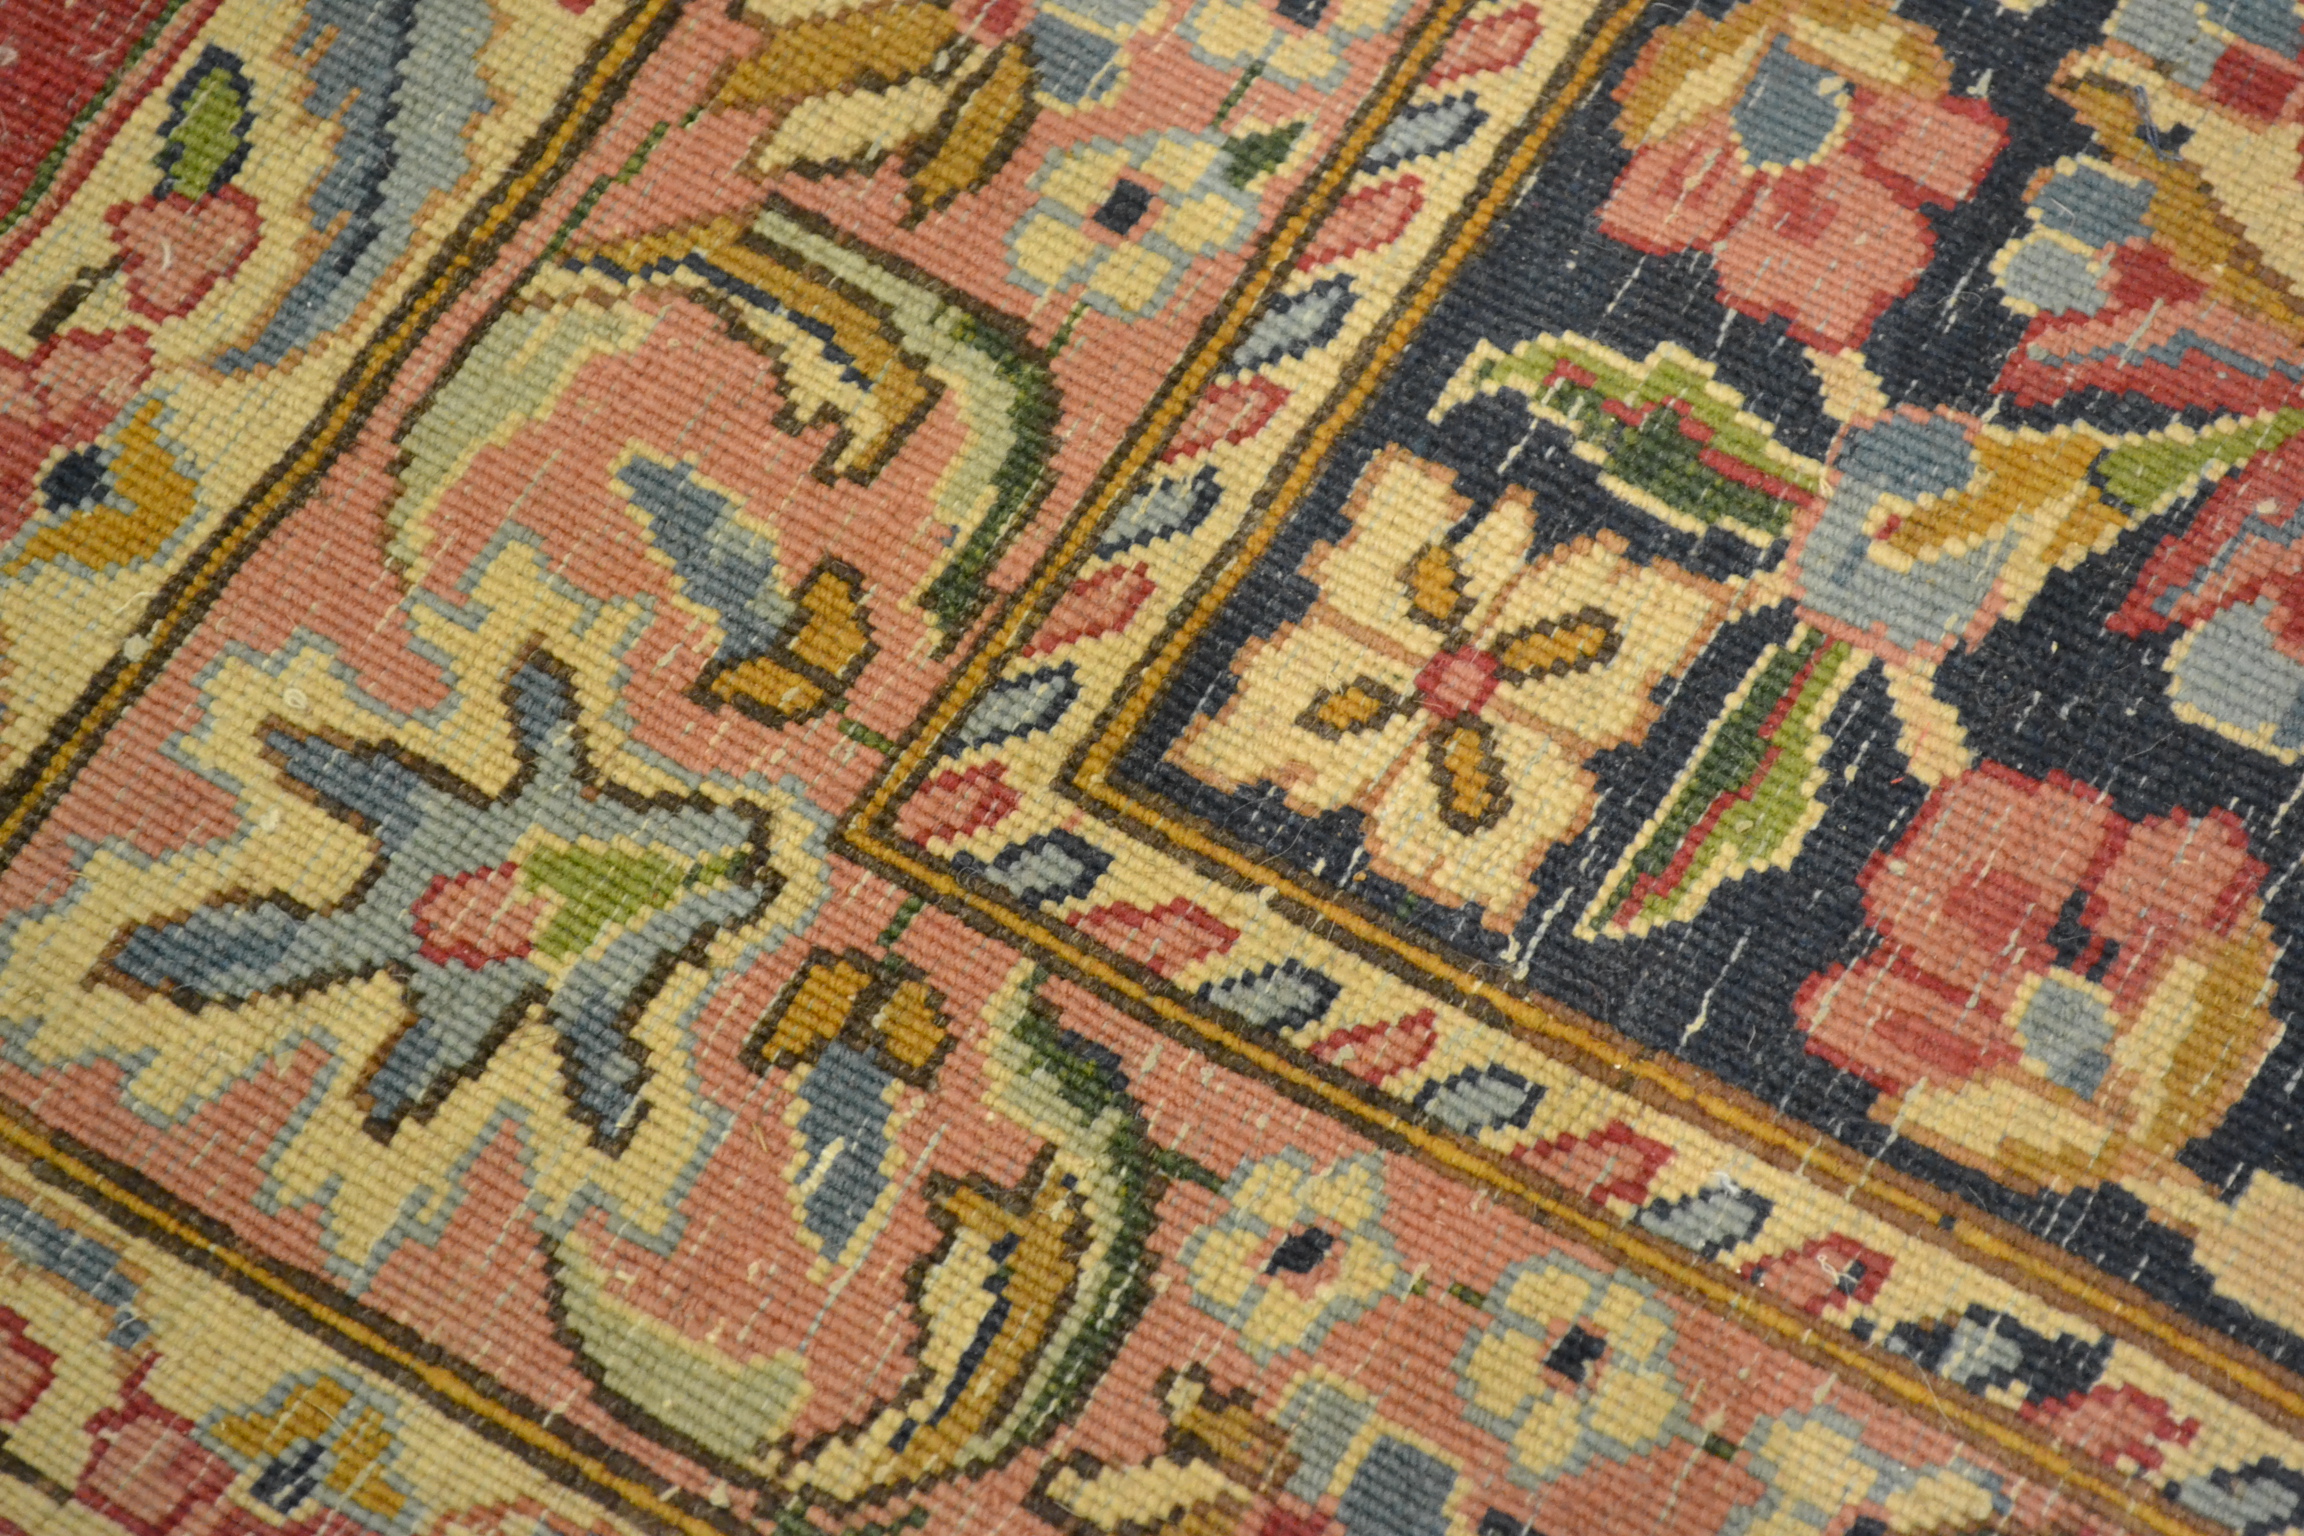 Kirman carpet, South East Persia, the raspberry field of scrolling vines around a floral medallion - Image 6 of 7